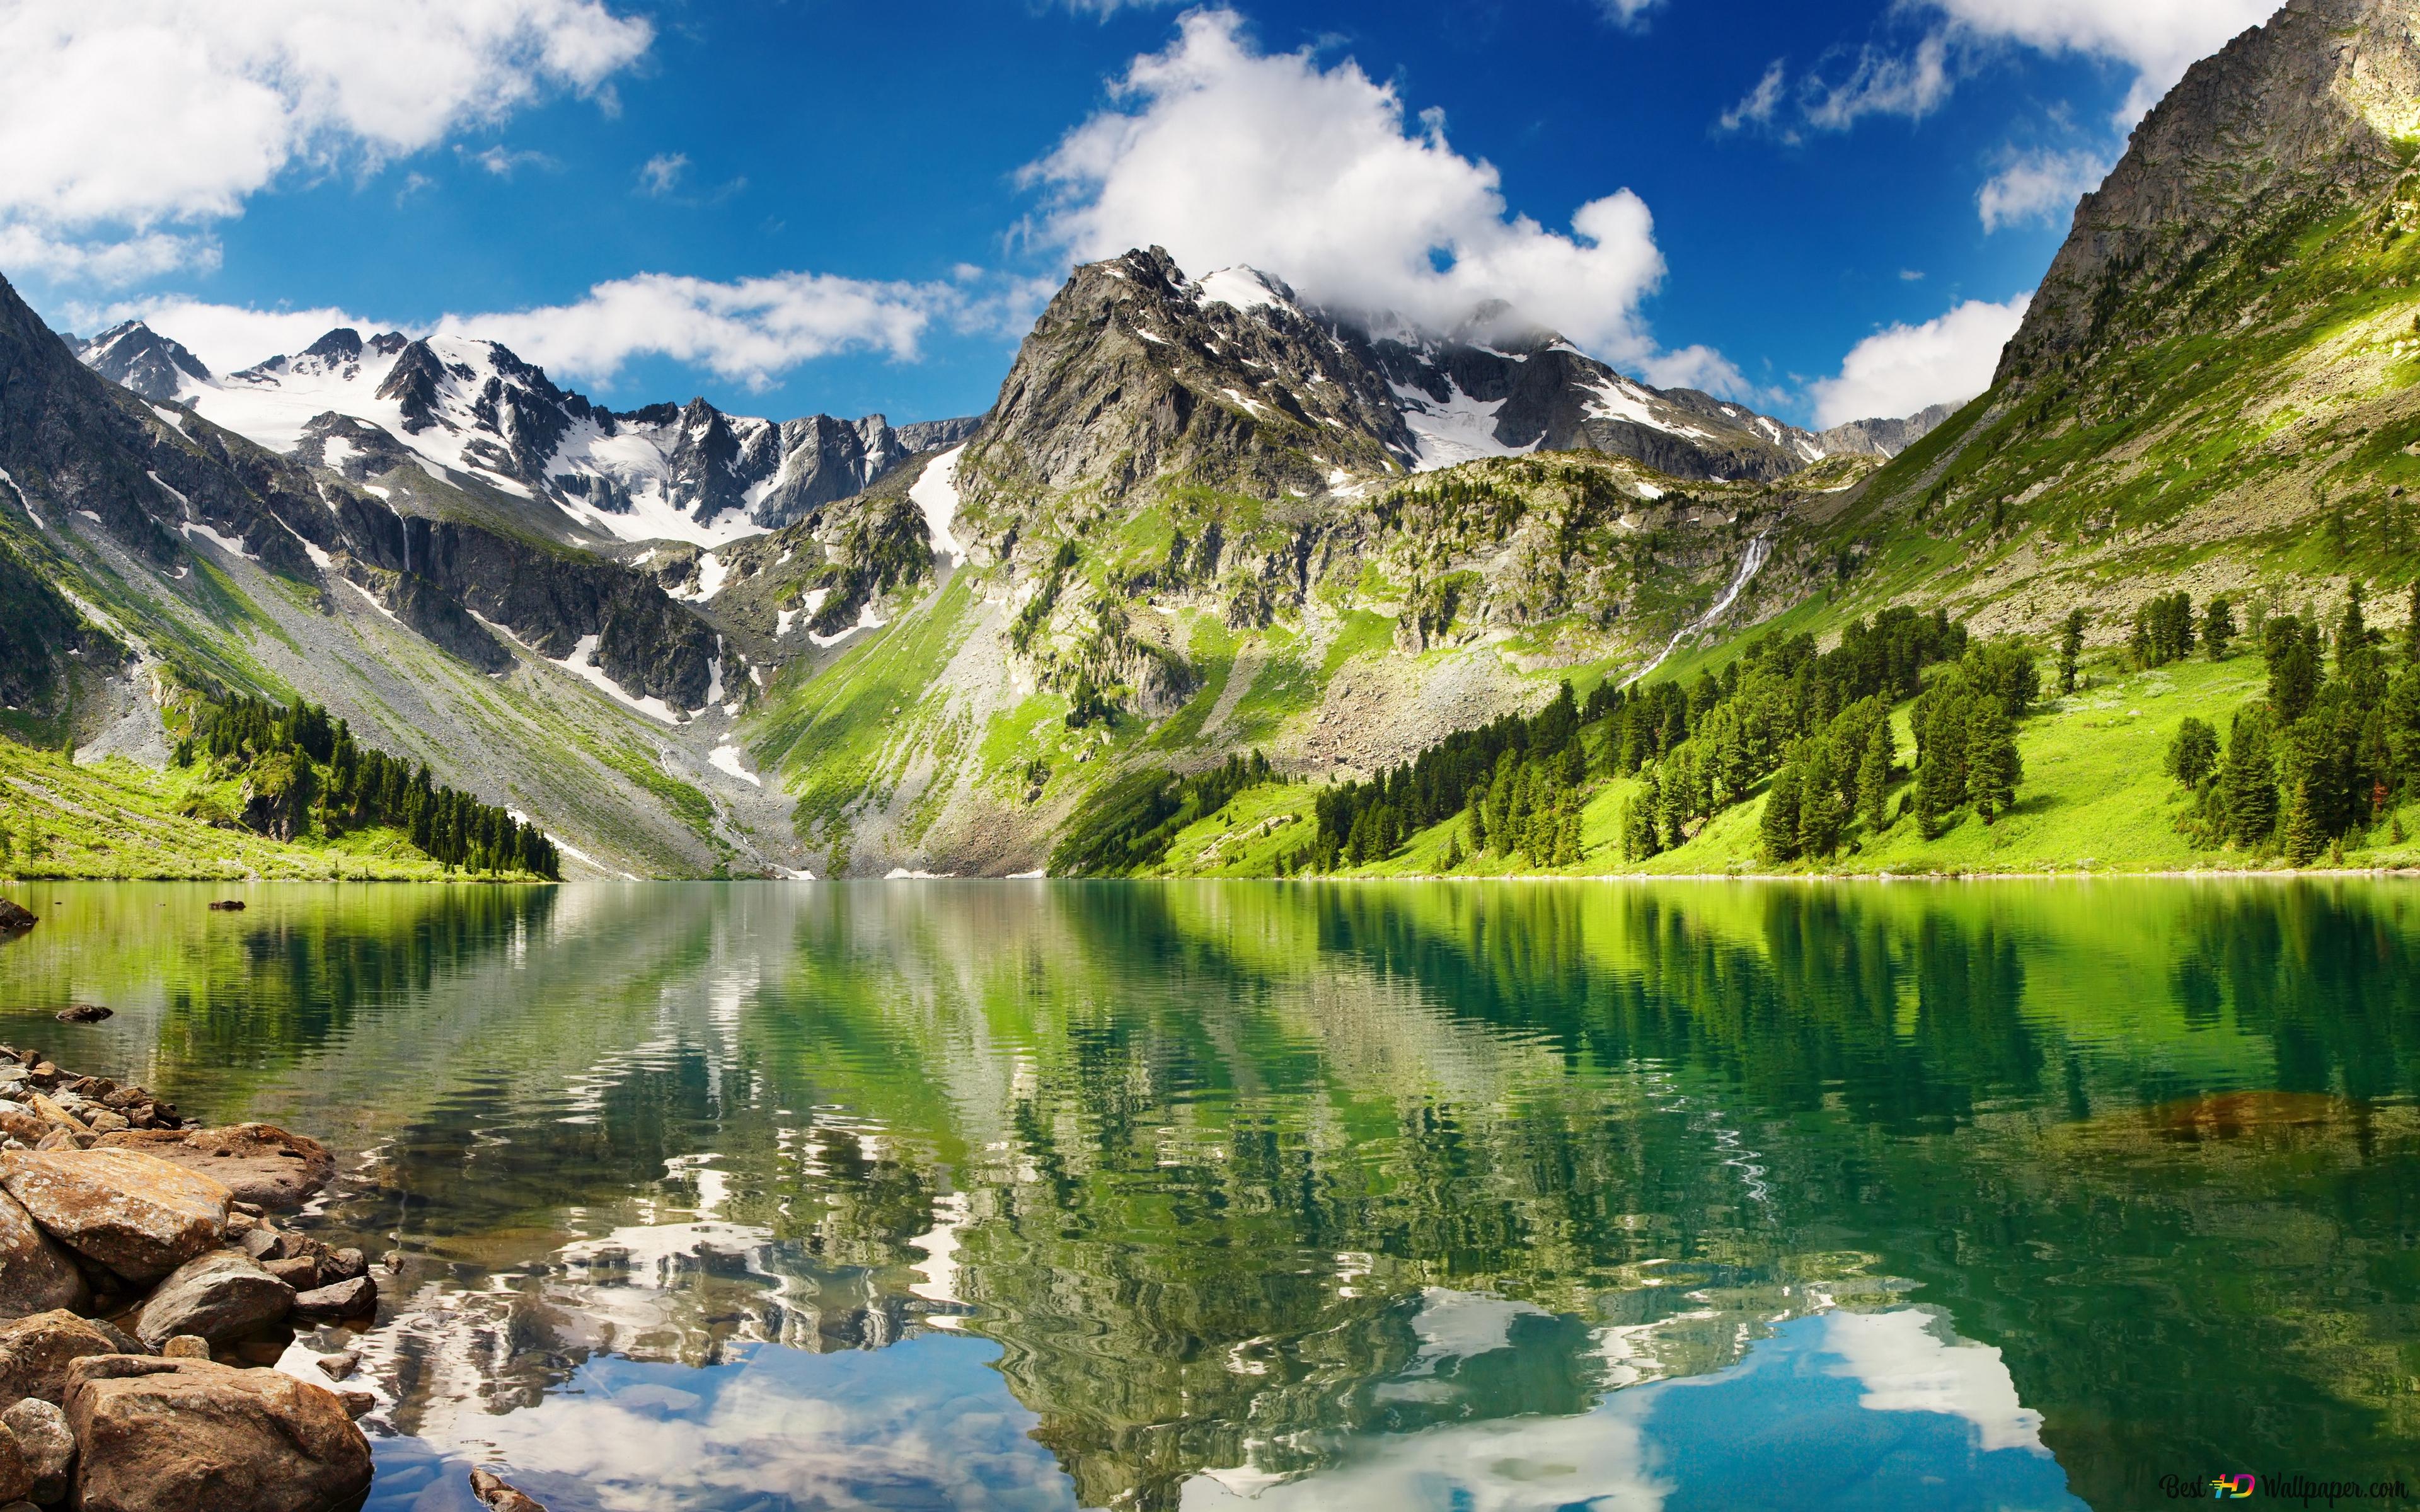 View of a lake and mountains from nature 4K wallpaper download